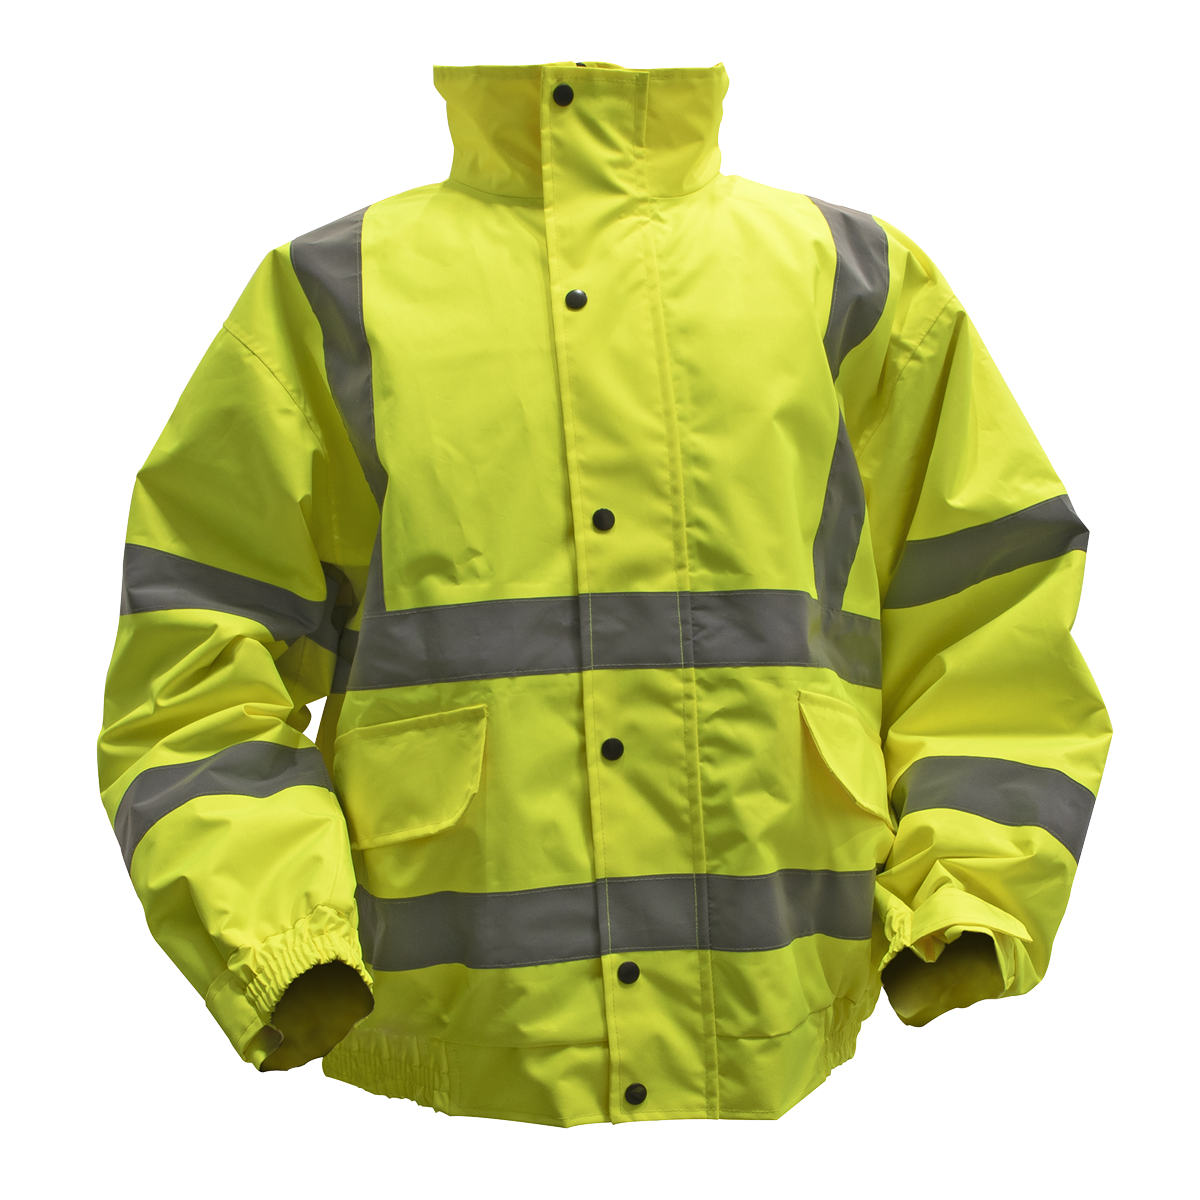 Sealey Hi-Vis Yellow Jacket with Quilted Lining & Elasticated Waist - Large 802L